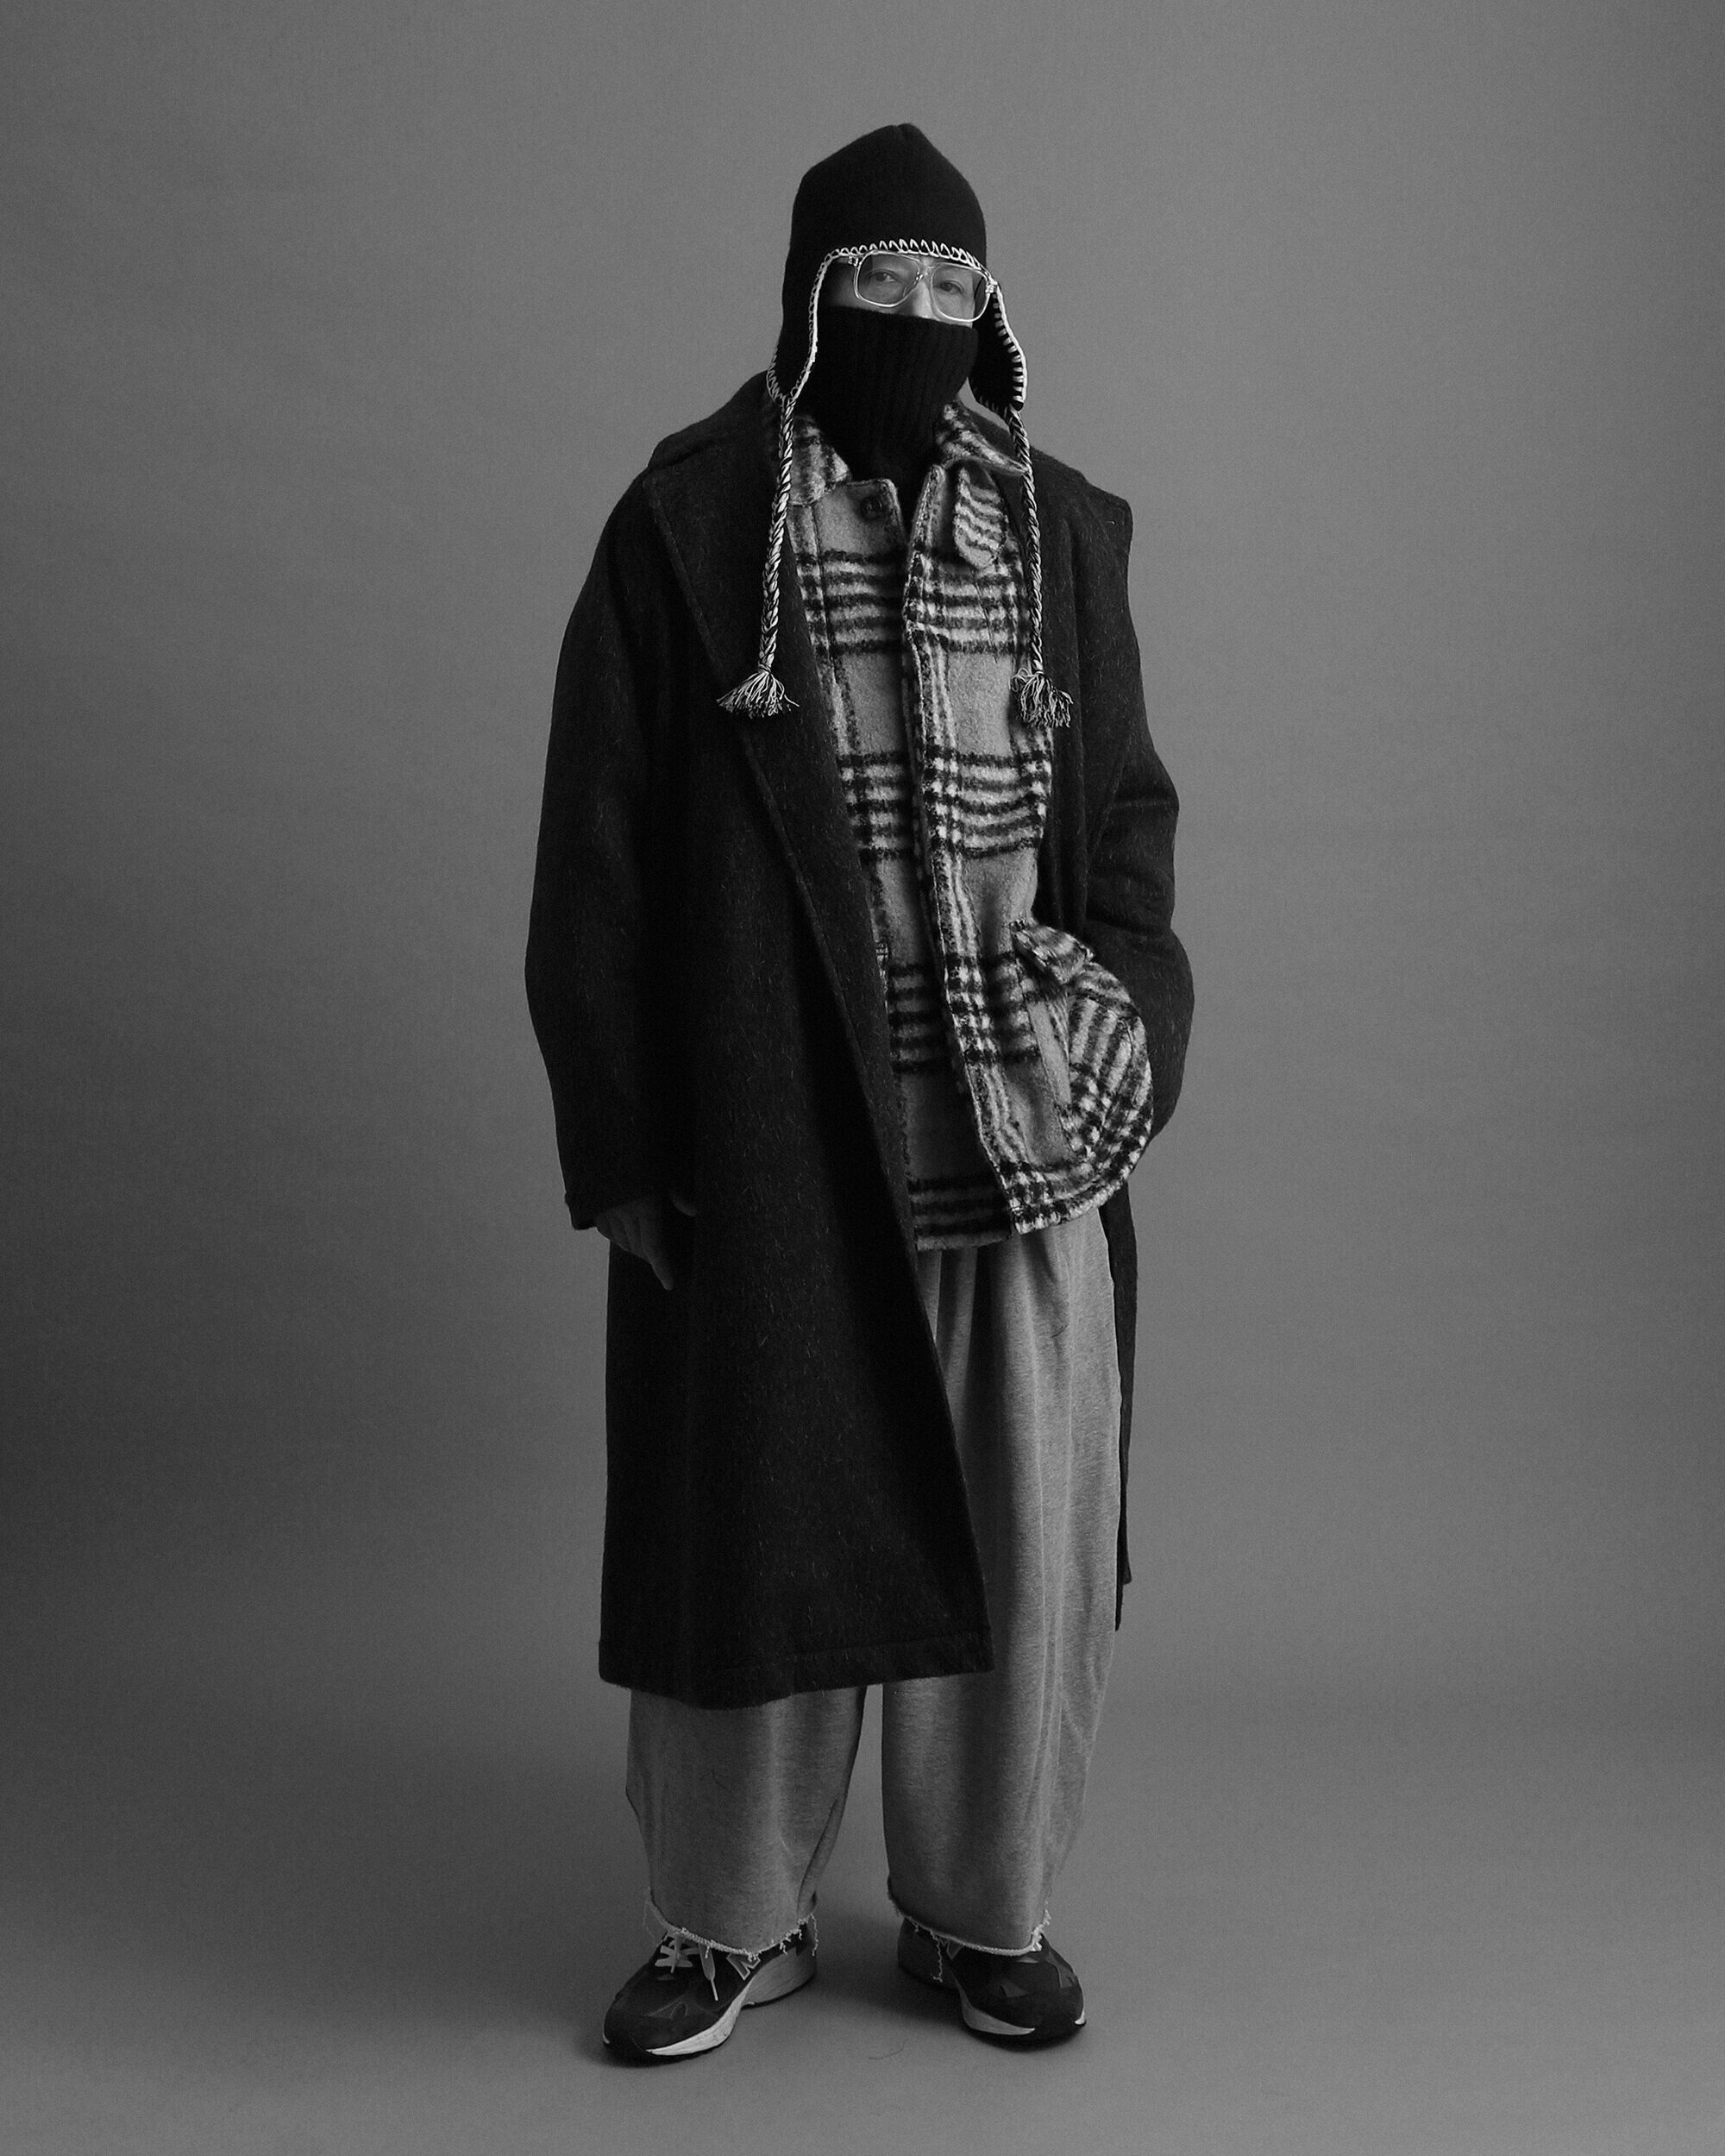 Sillage Explores Woolen Materials With Outerwear-Heavy Winter 